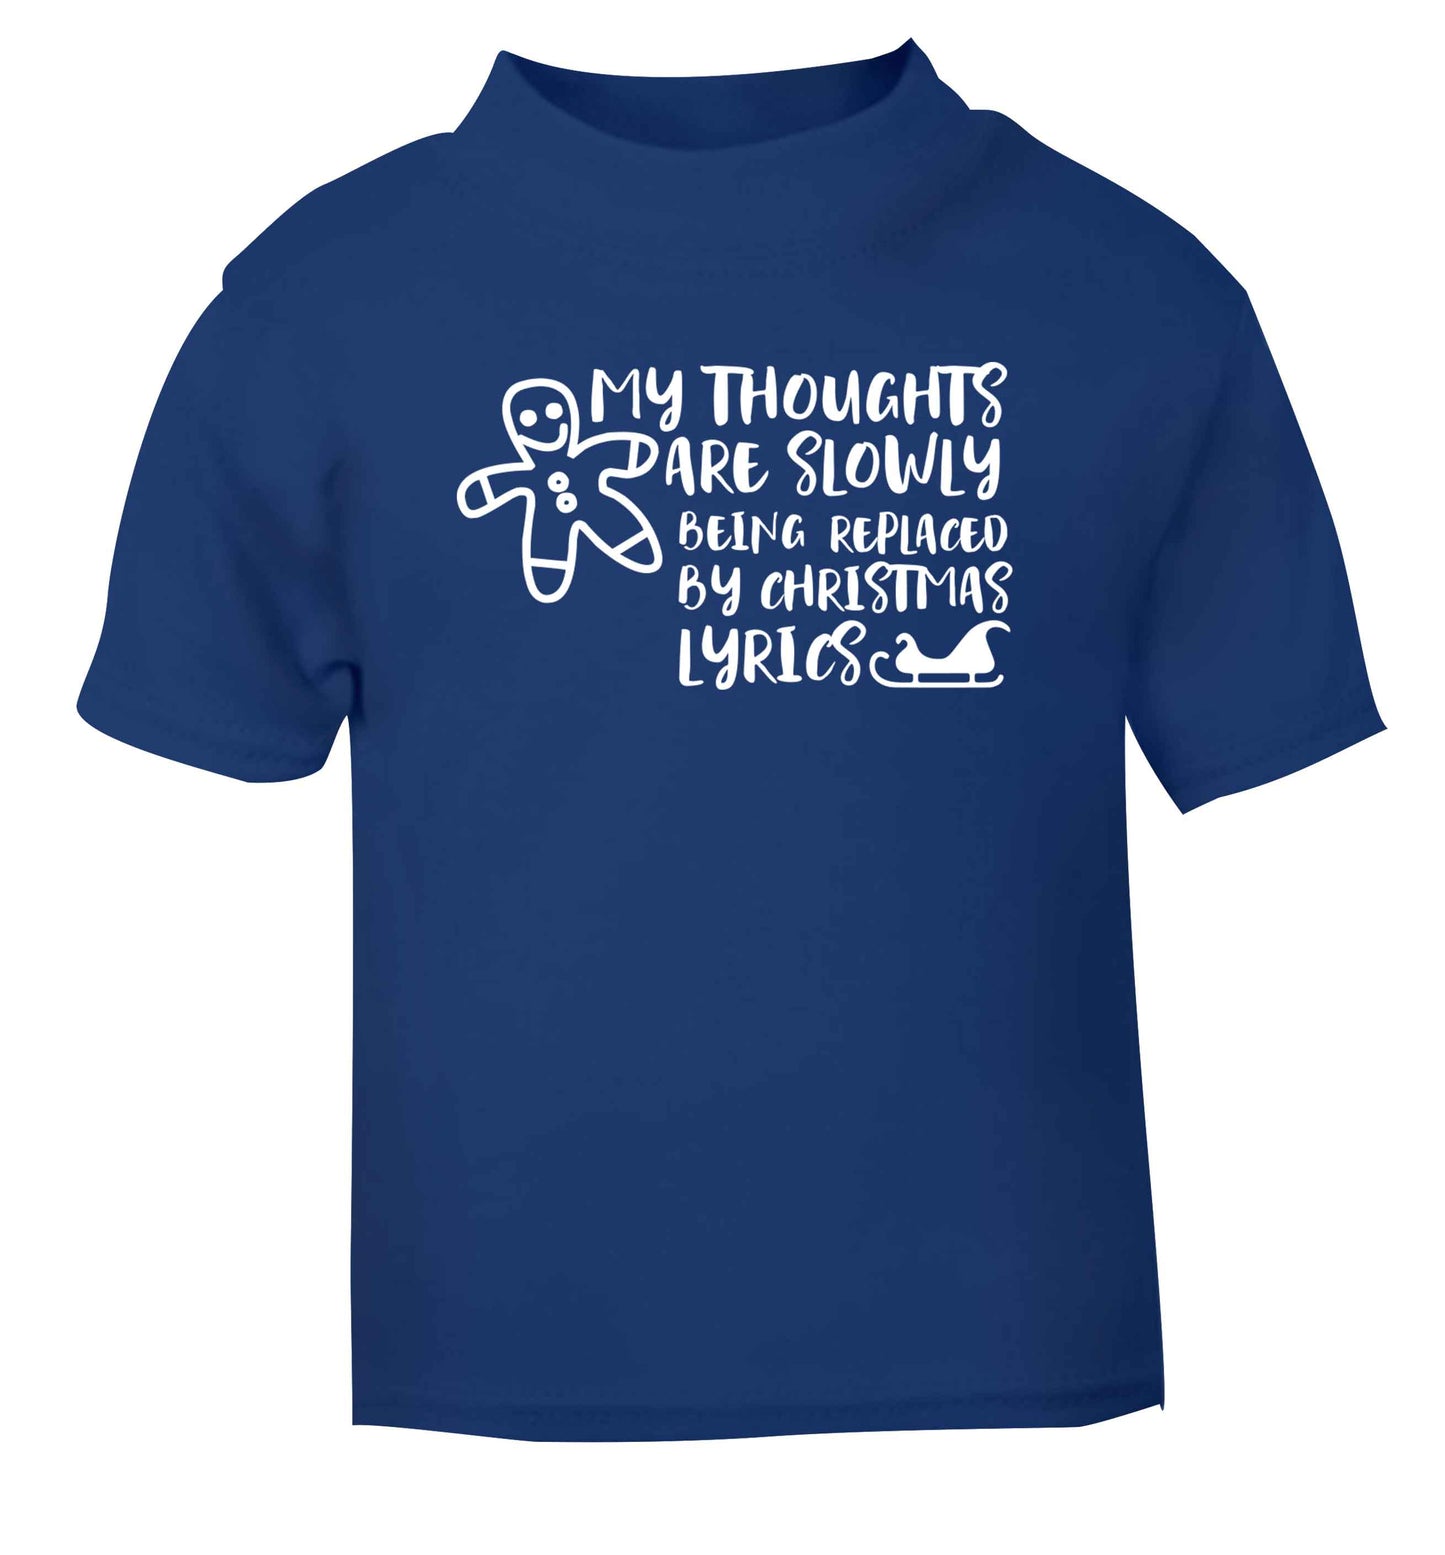 My thoughts are slowly being replaced by Christmas lyrics blue Baby Toddler Tshirt 2 Years